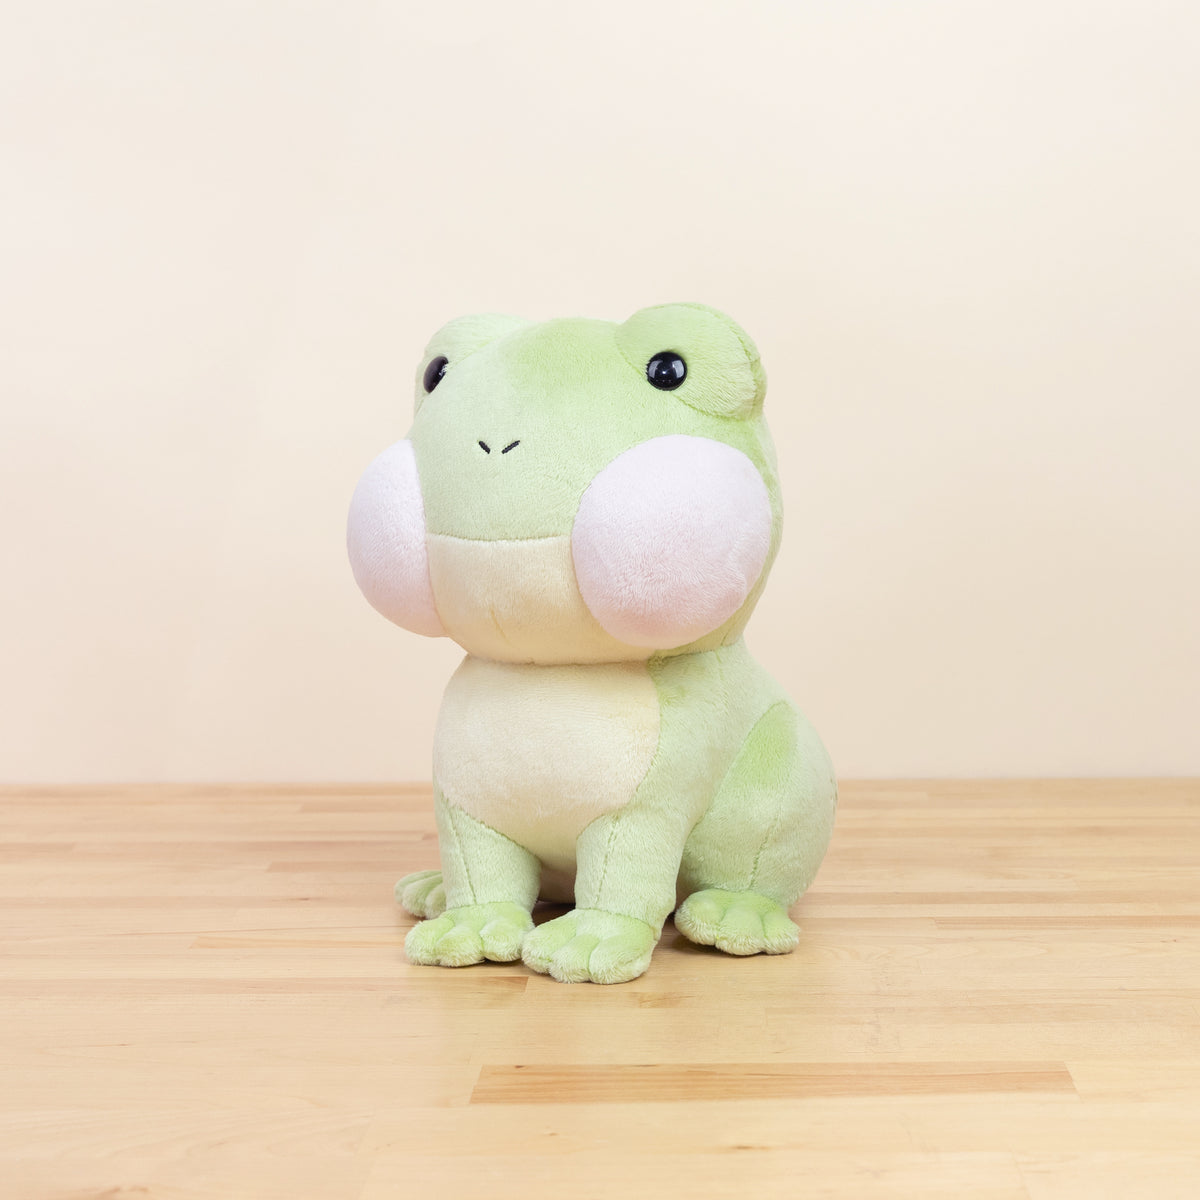 Plush toy of a frog